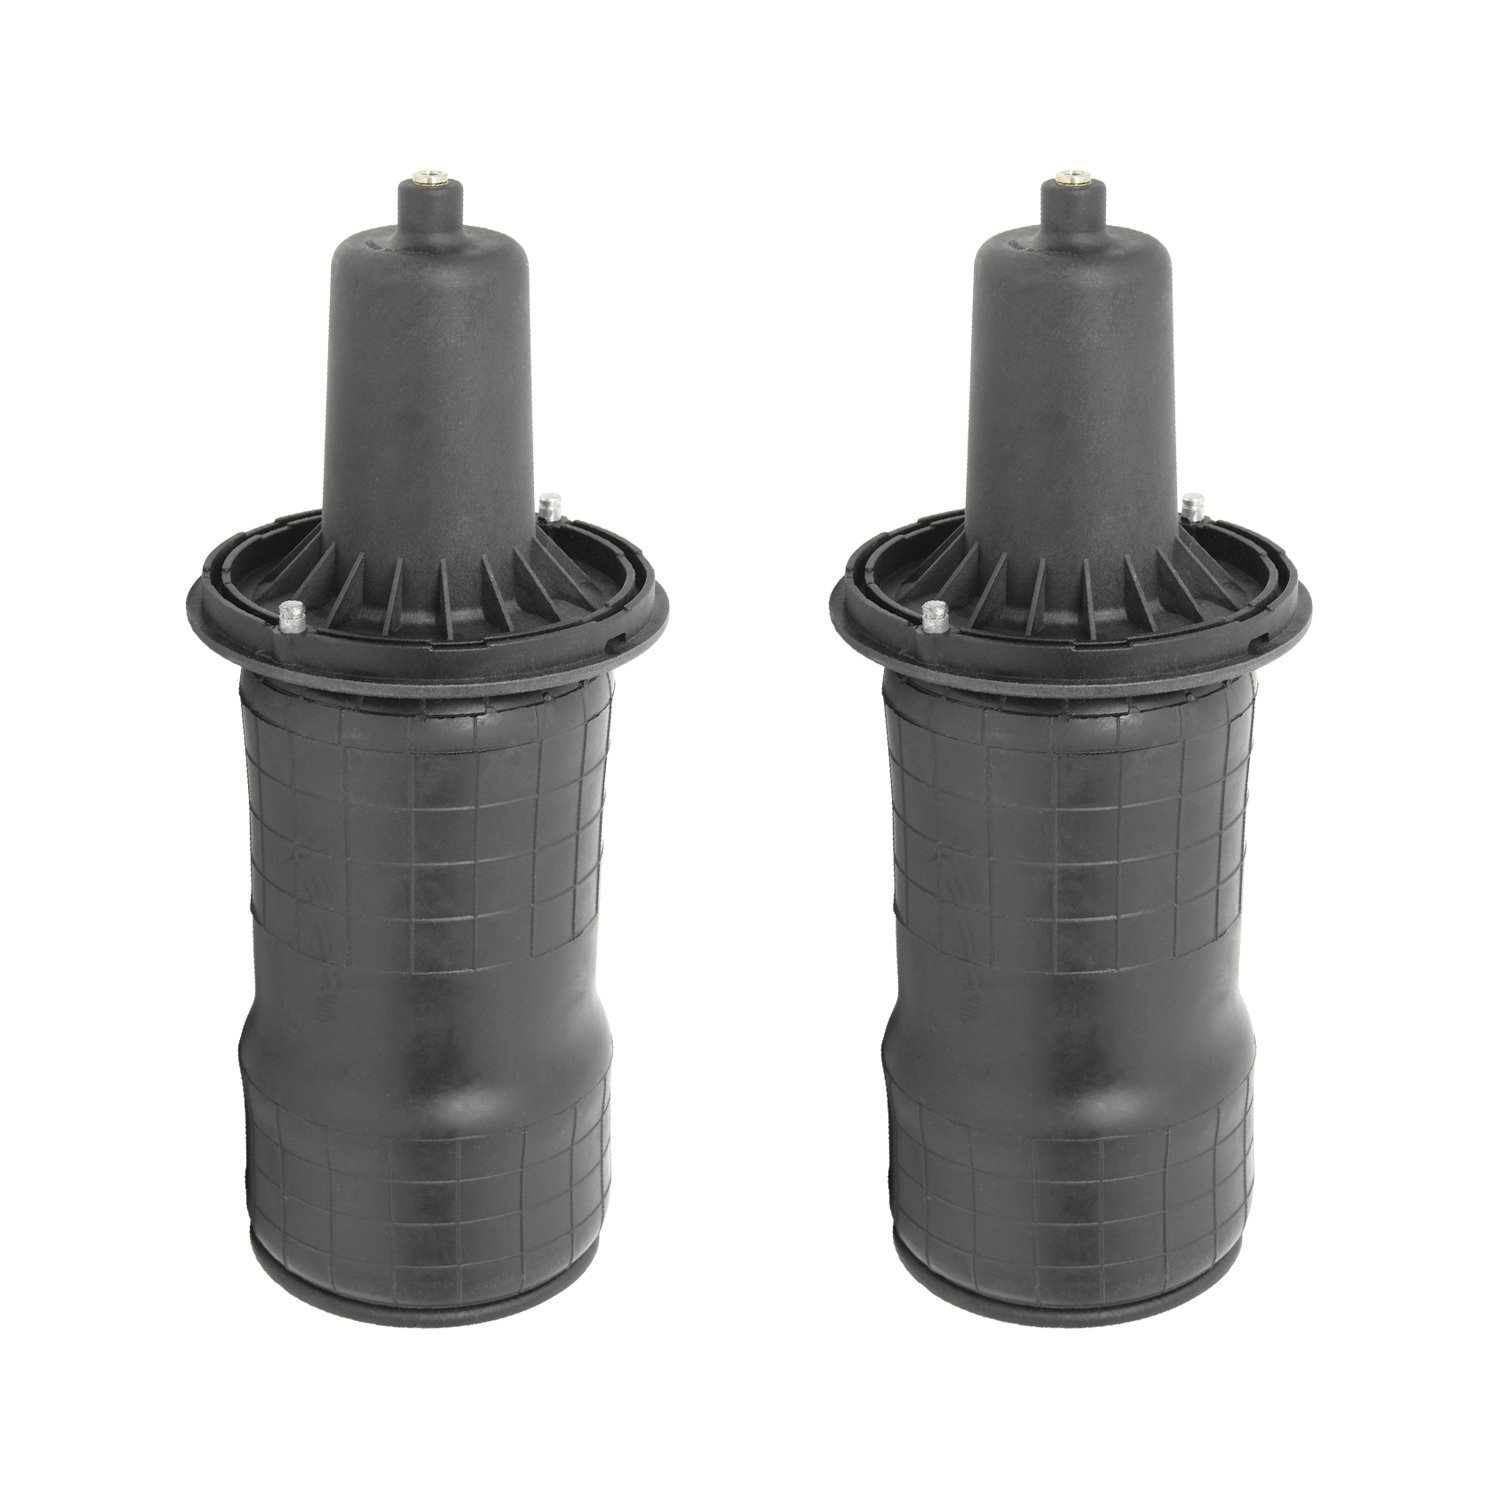 2-15-170000 Front Suspension Air Spring Set, Generation II Fits Select Land Rover Range Rover